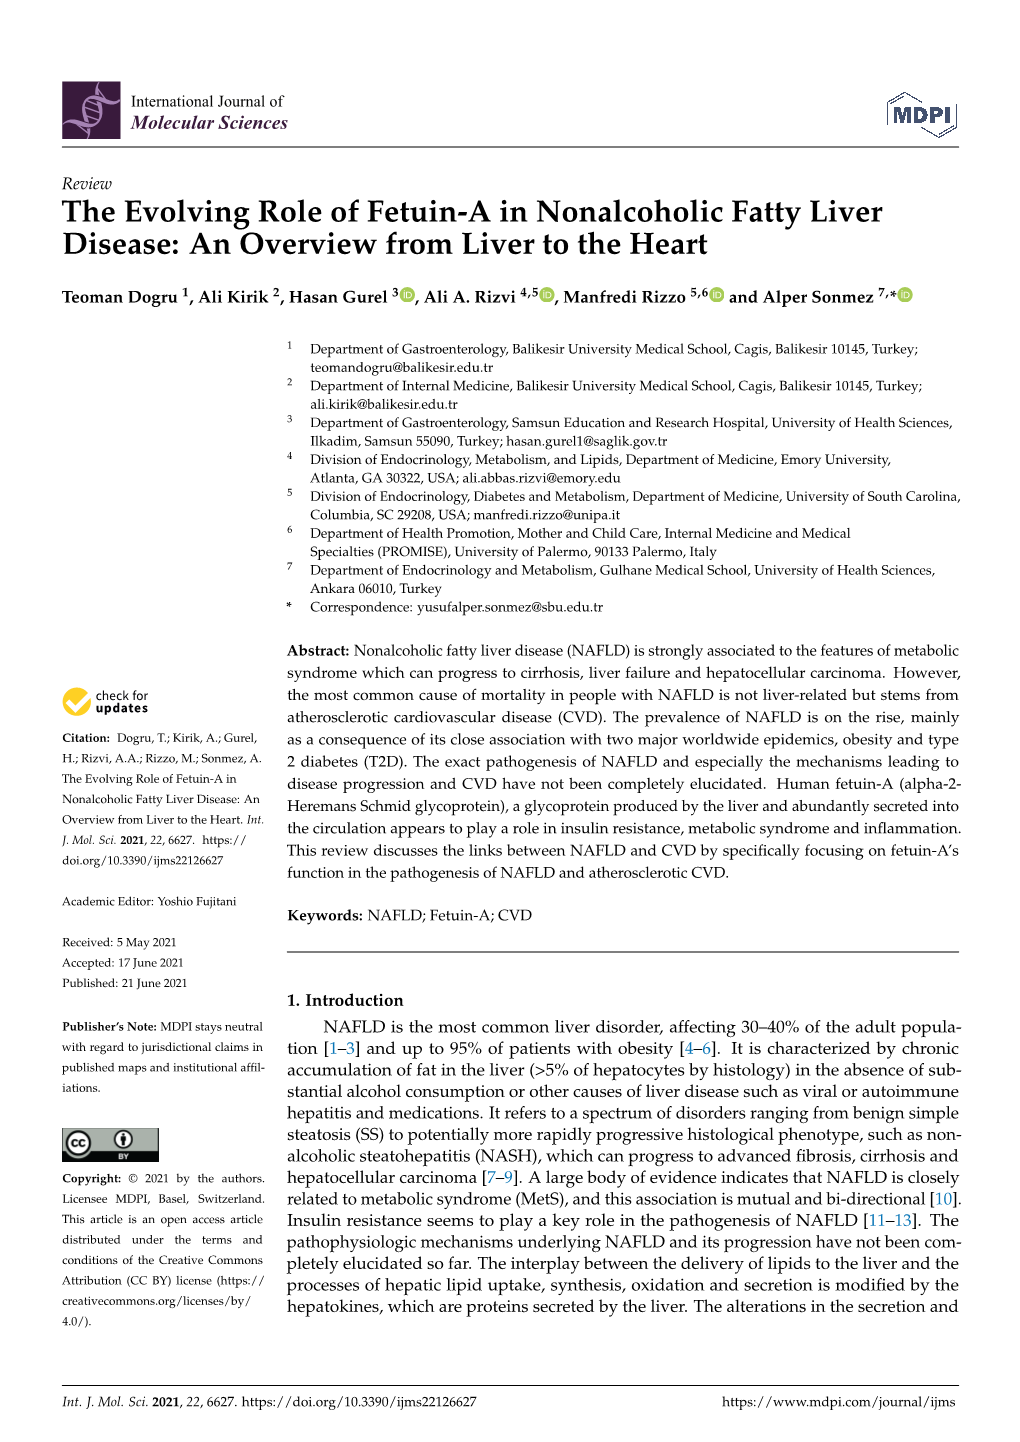 The Evolving Role of Fetuin-A in Nonalcoholic Fatty Liver Disease: an Overview from Liver to the Heart